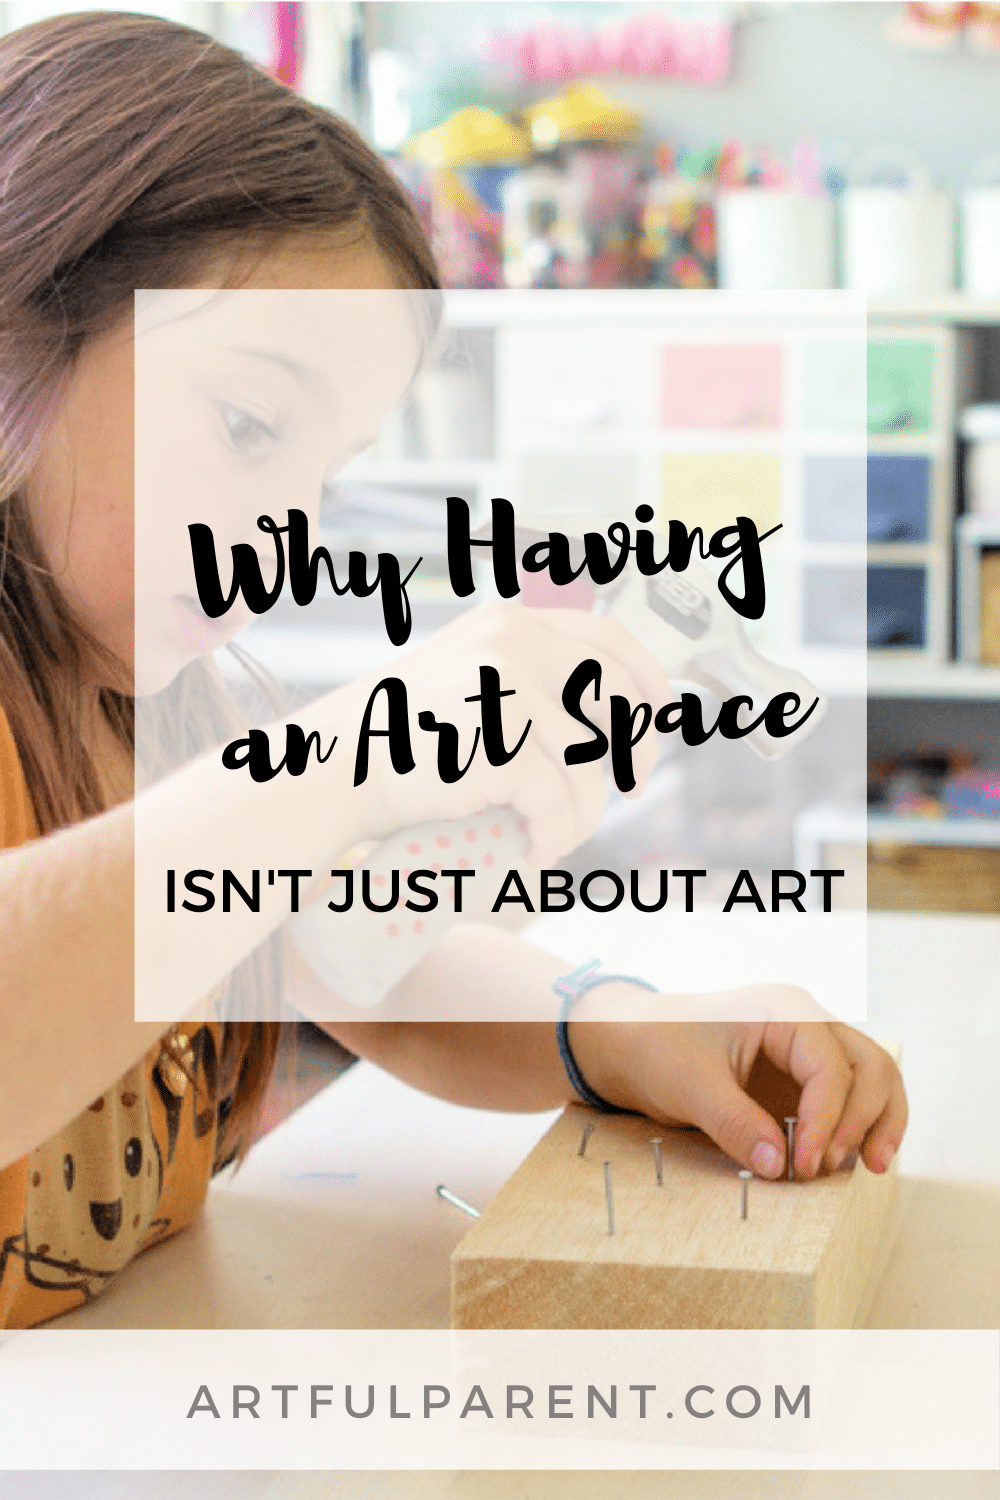 setting up an art space by art pantry pinterest